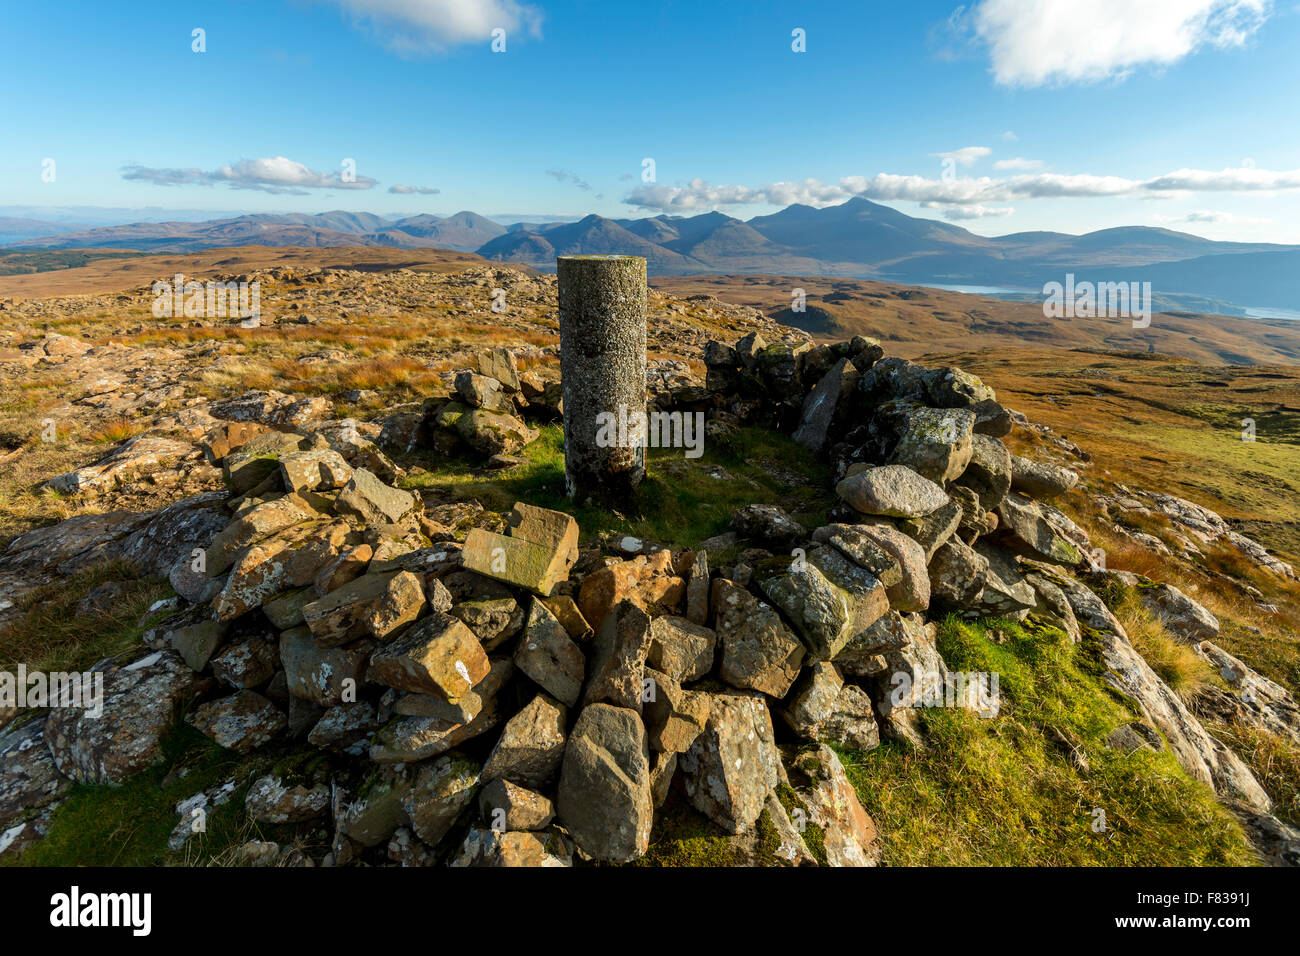 The Ben More range from the summit of Beinn na Drise, Isle of Mull, Argyll and Bute, Scotland, UK. Ben More is on the right. Stock Photo